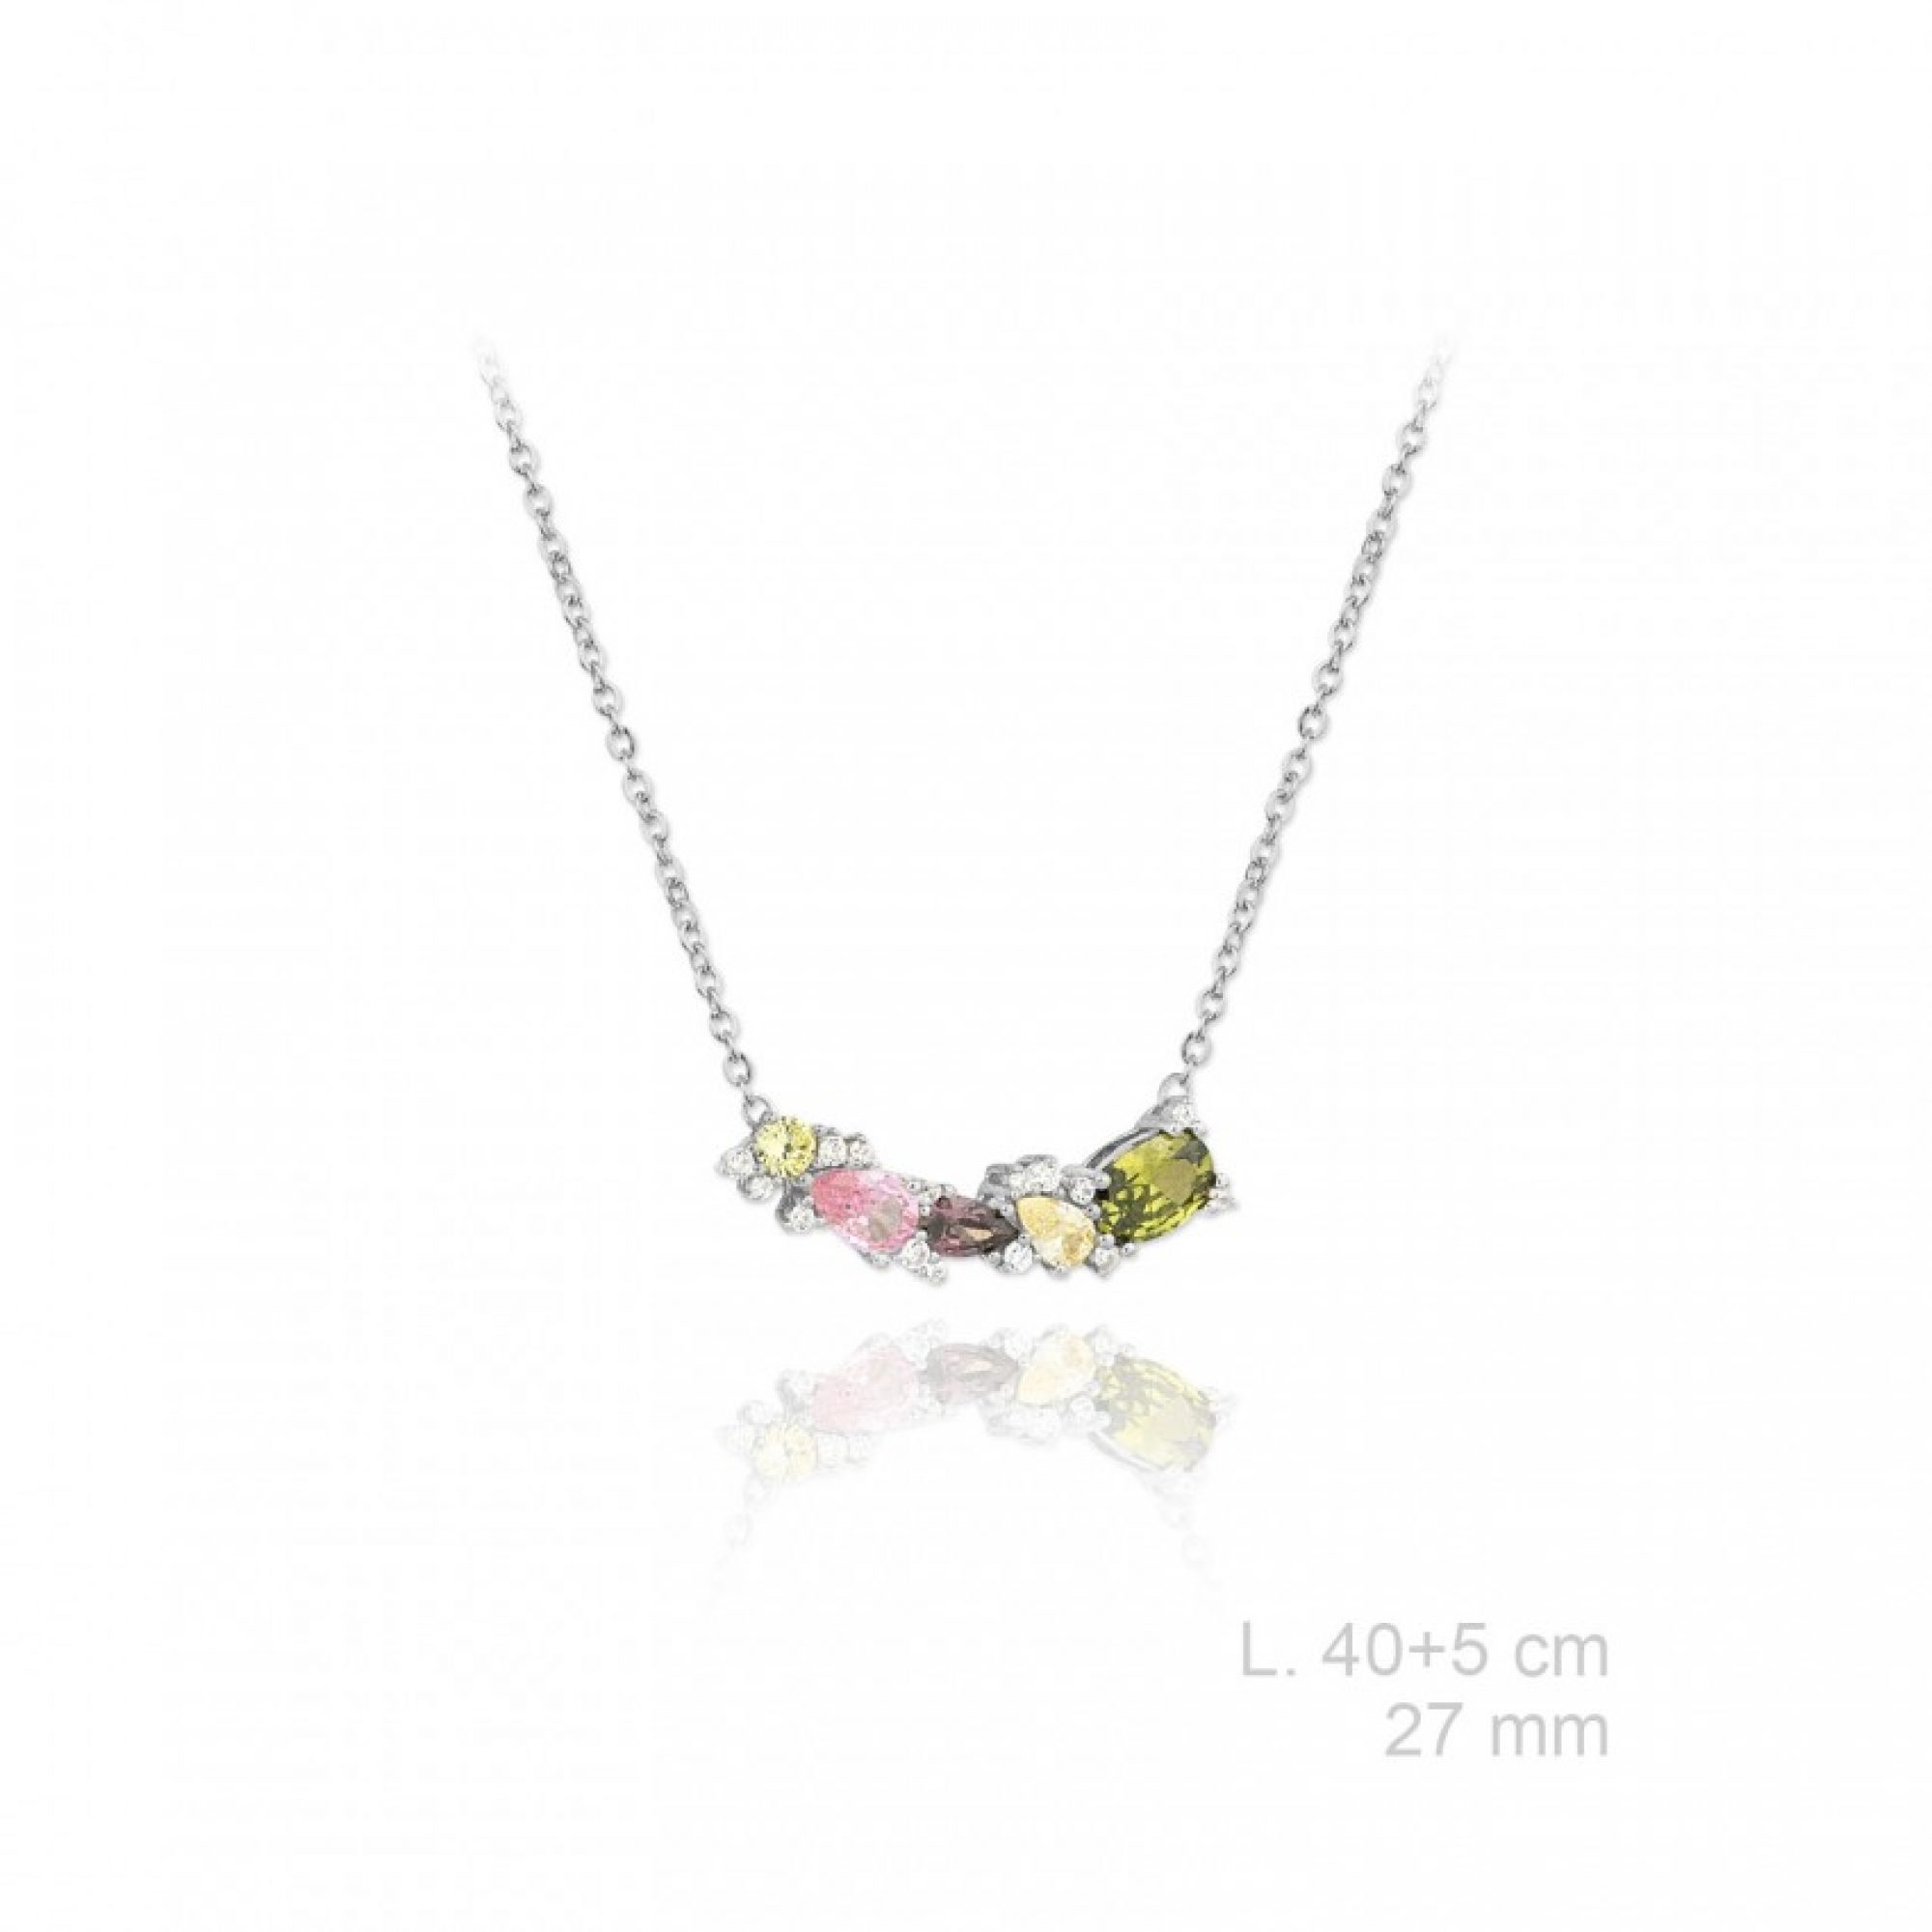 Silver necklace with zircon and coloured stones